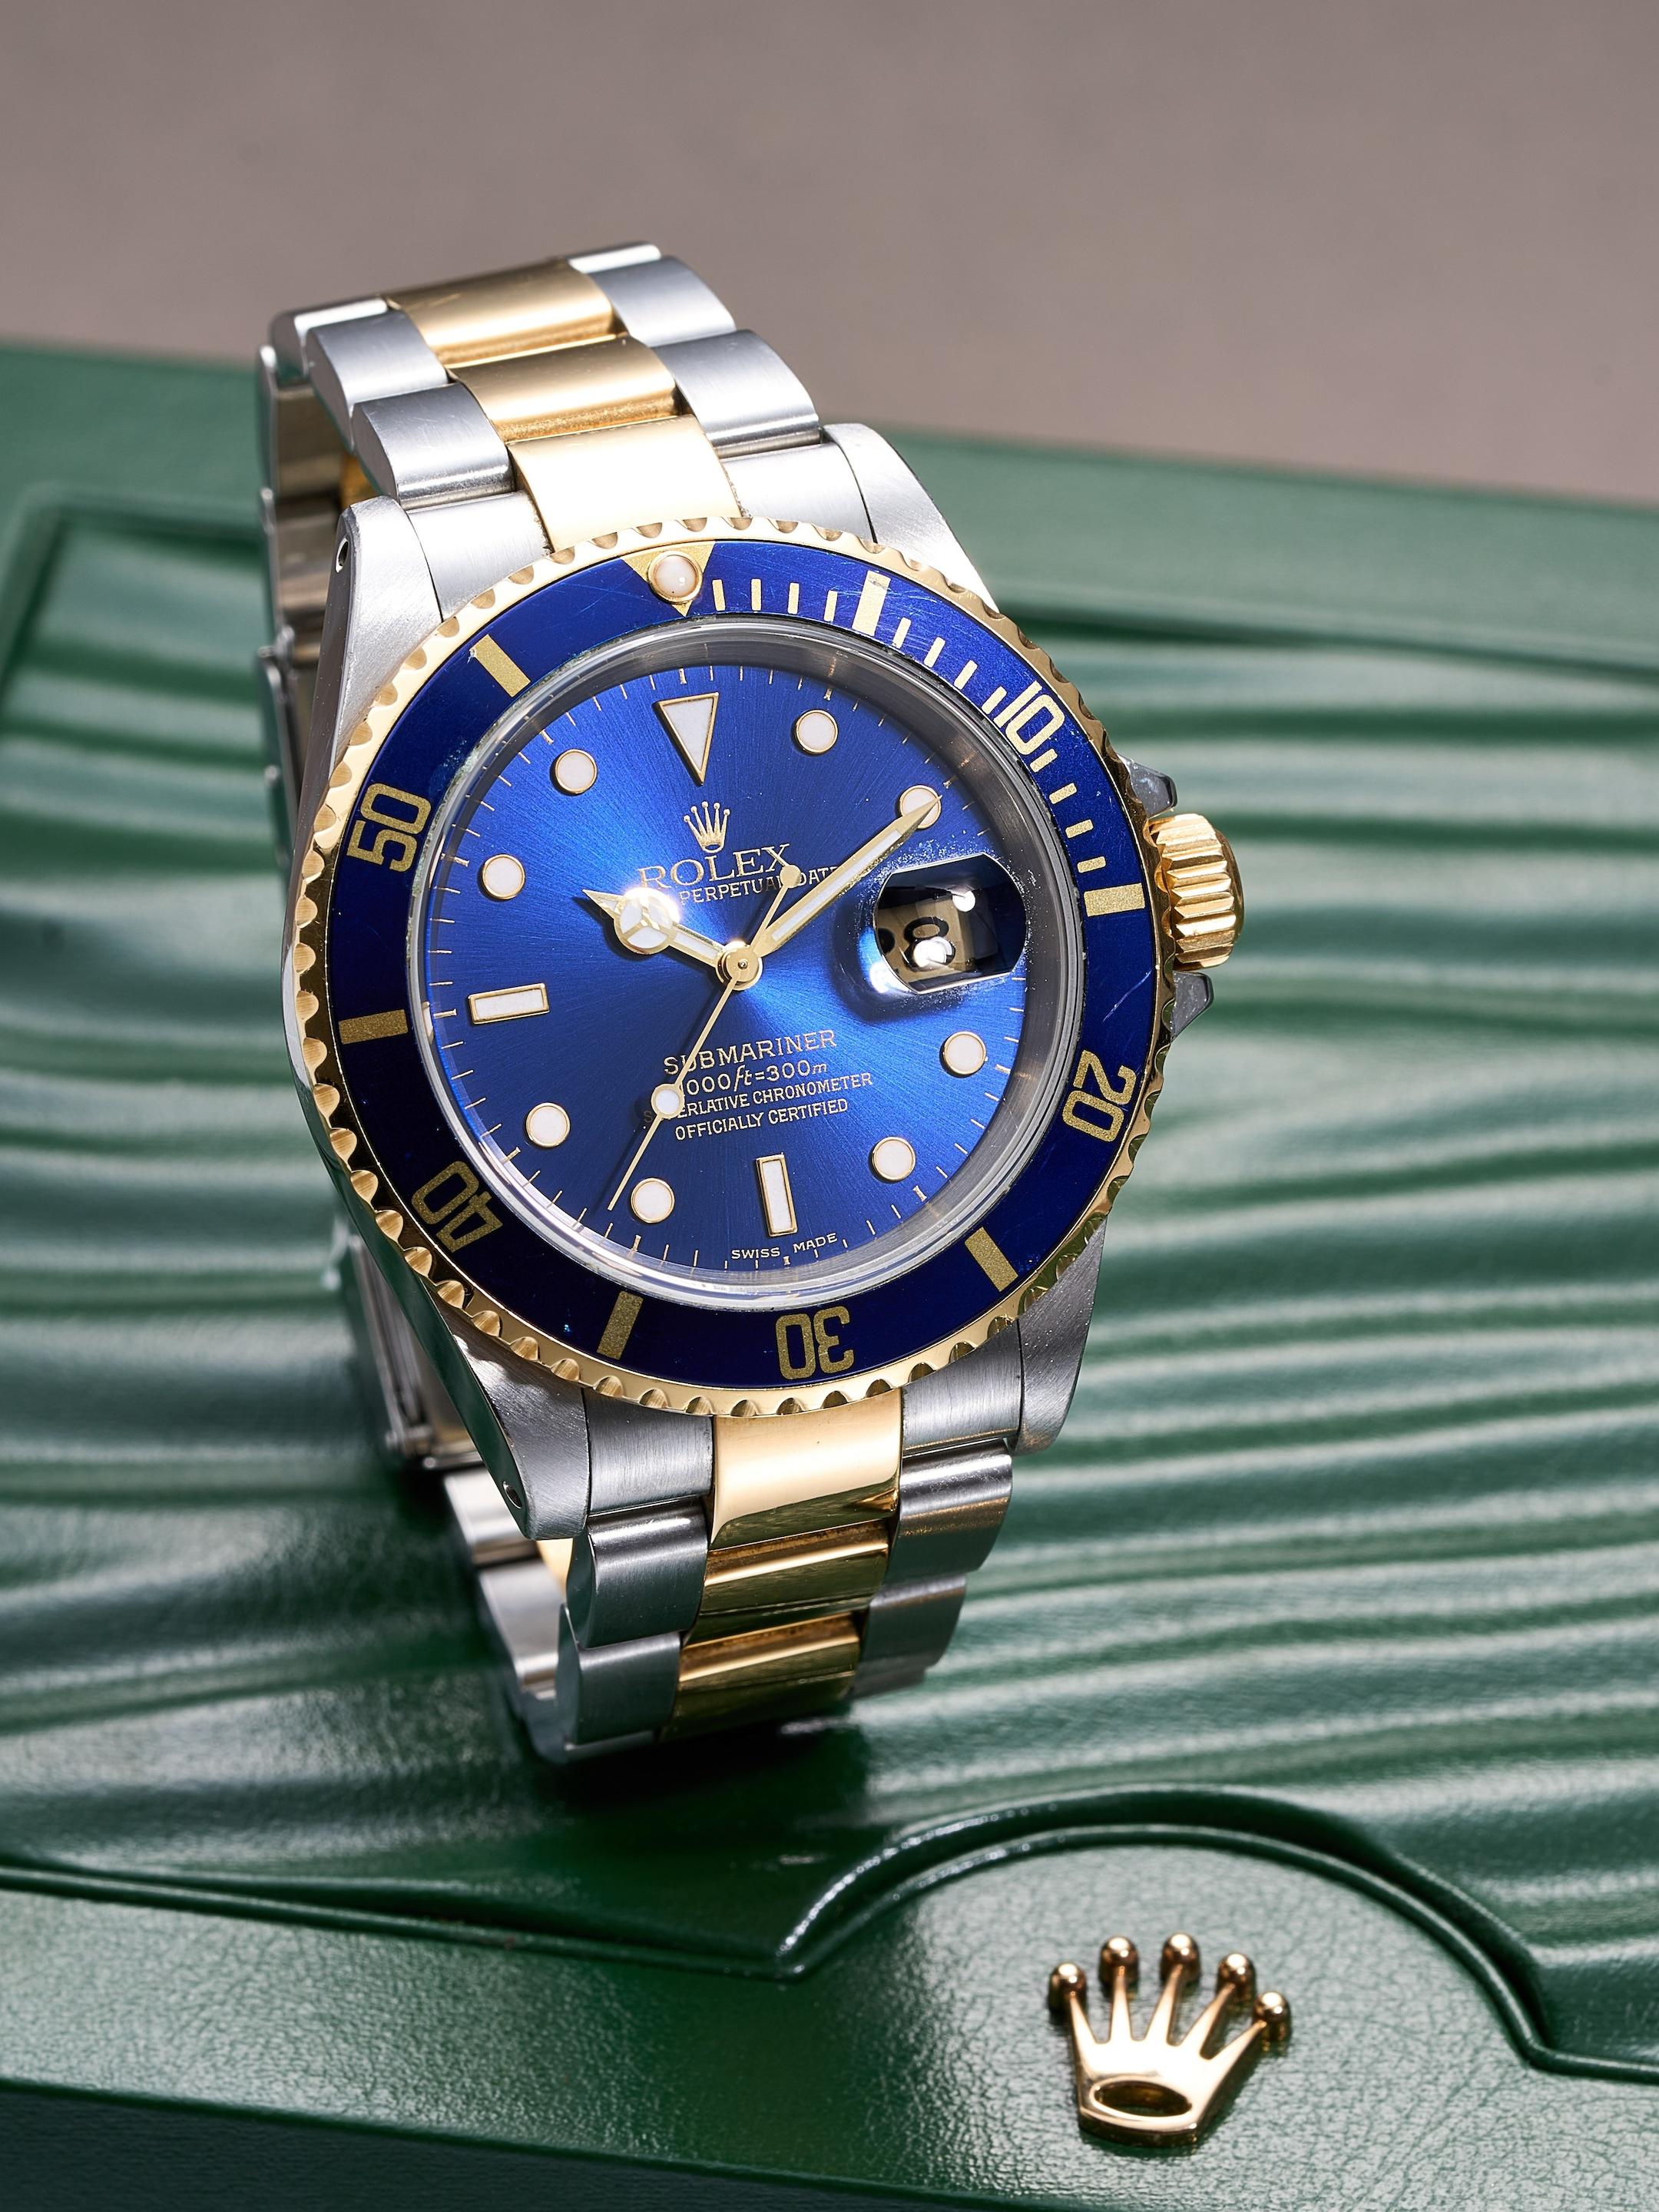 Bonhams ROLEX SUBMARINER, STAINLESS STEEL AND YELLOW GOLD BRACELET WATCH WITH DATE, 2000